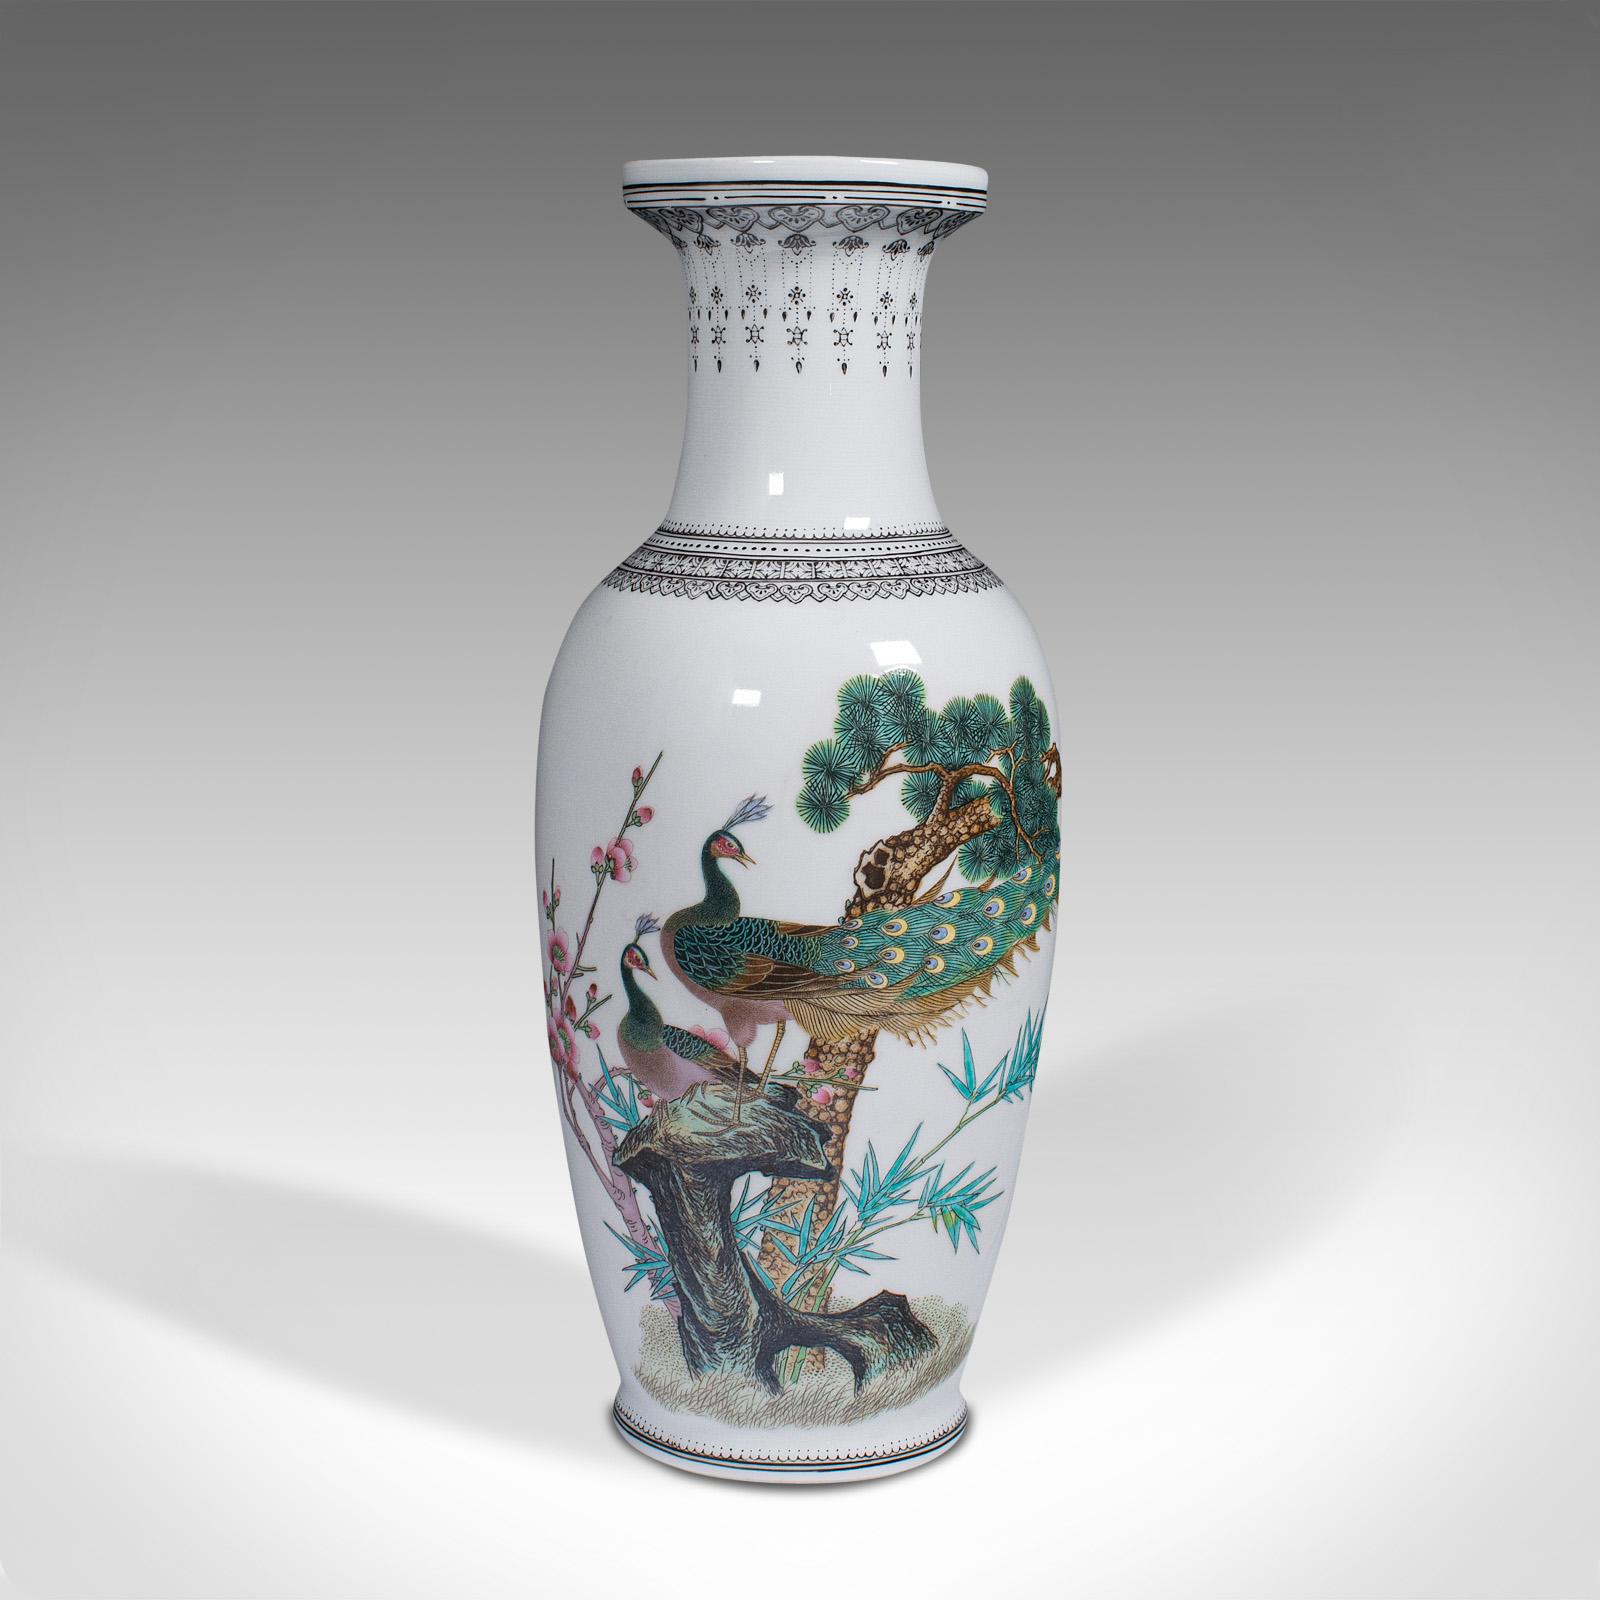 This is a vintage decorative posy vase. A Chinese, ceramic flower urn with peacock decor, dating to the mid 20th century, circa 1960. 

Pleasingly detailed vase with strong Oriental taste
Displays a desirable aged patina and in good